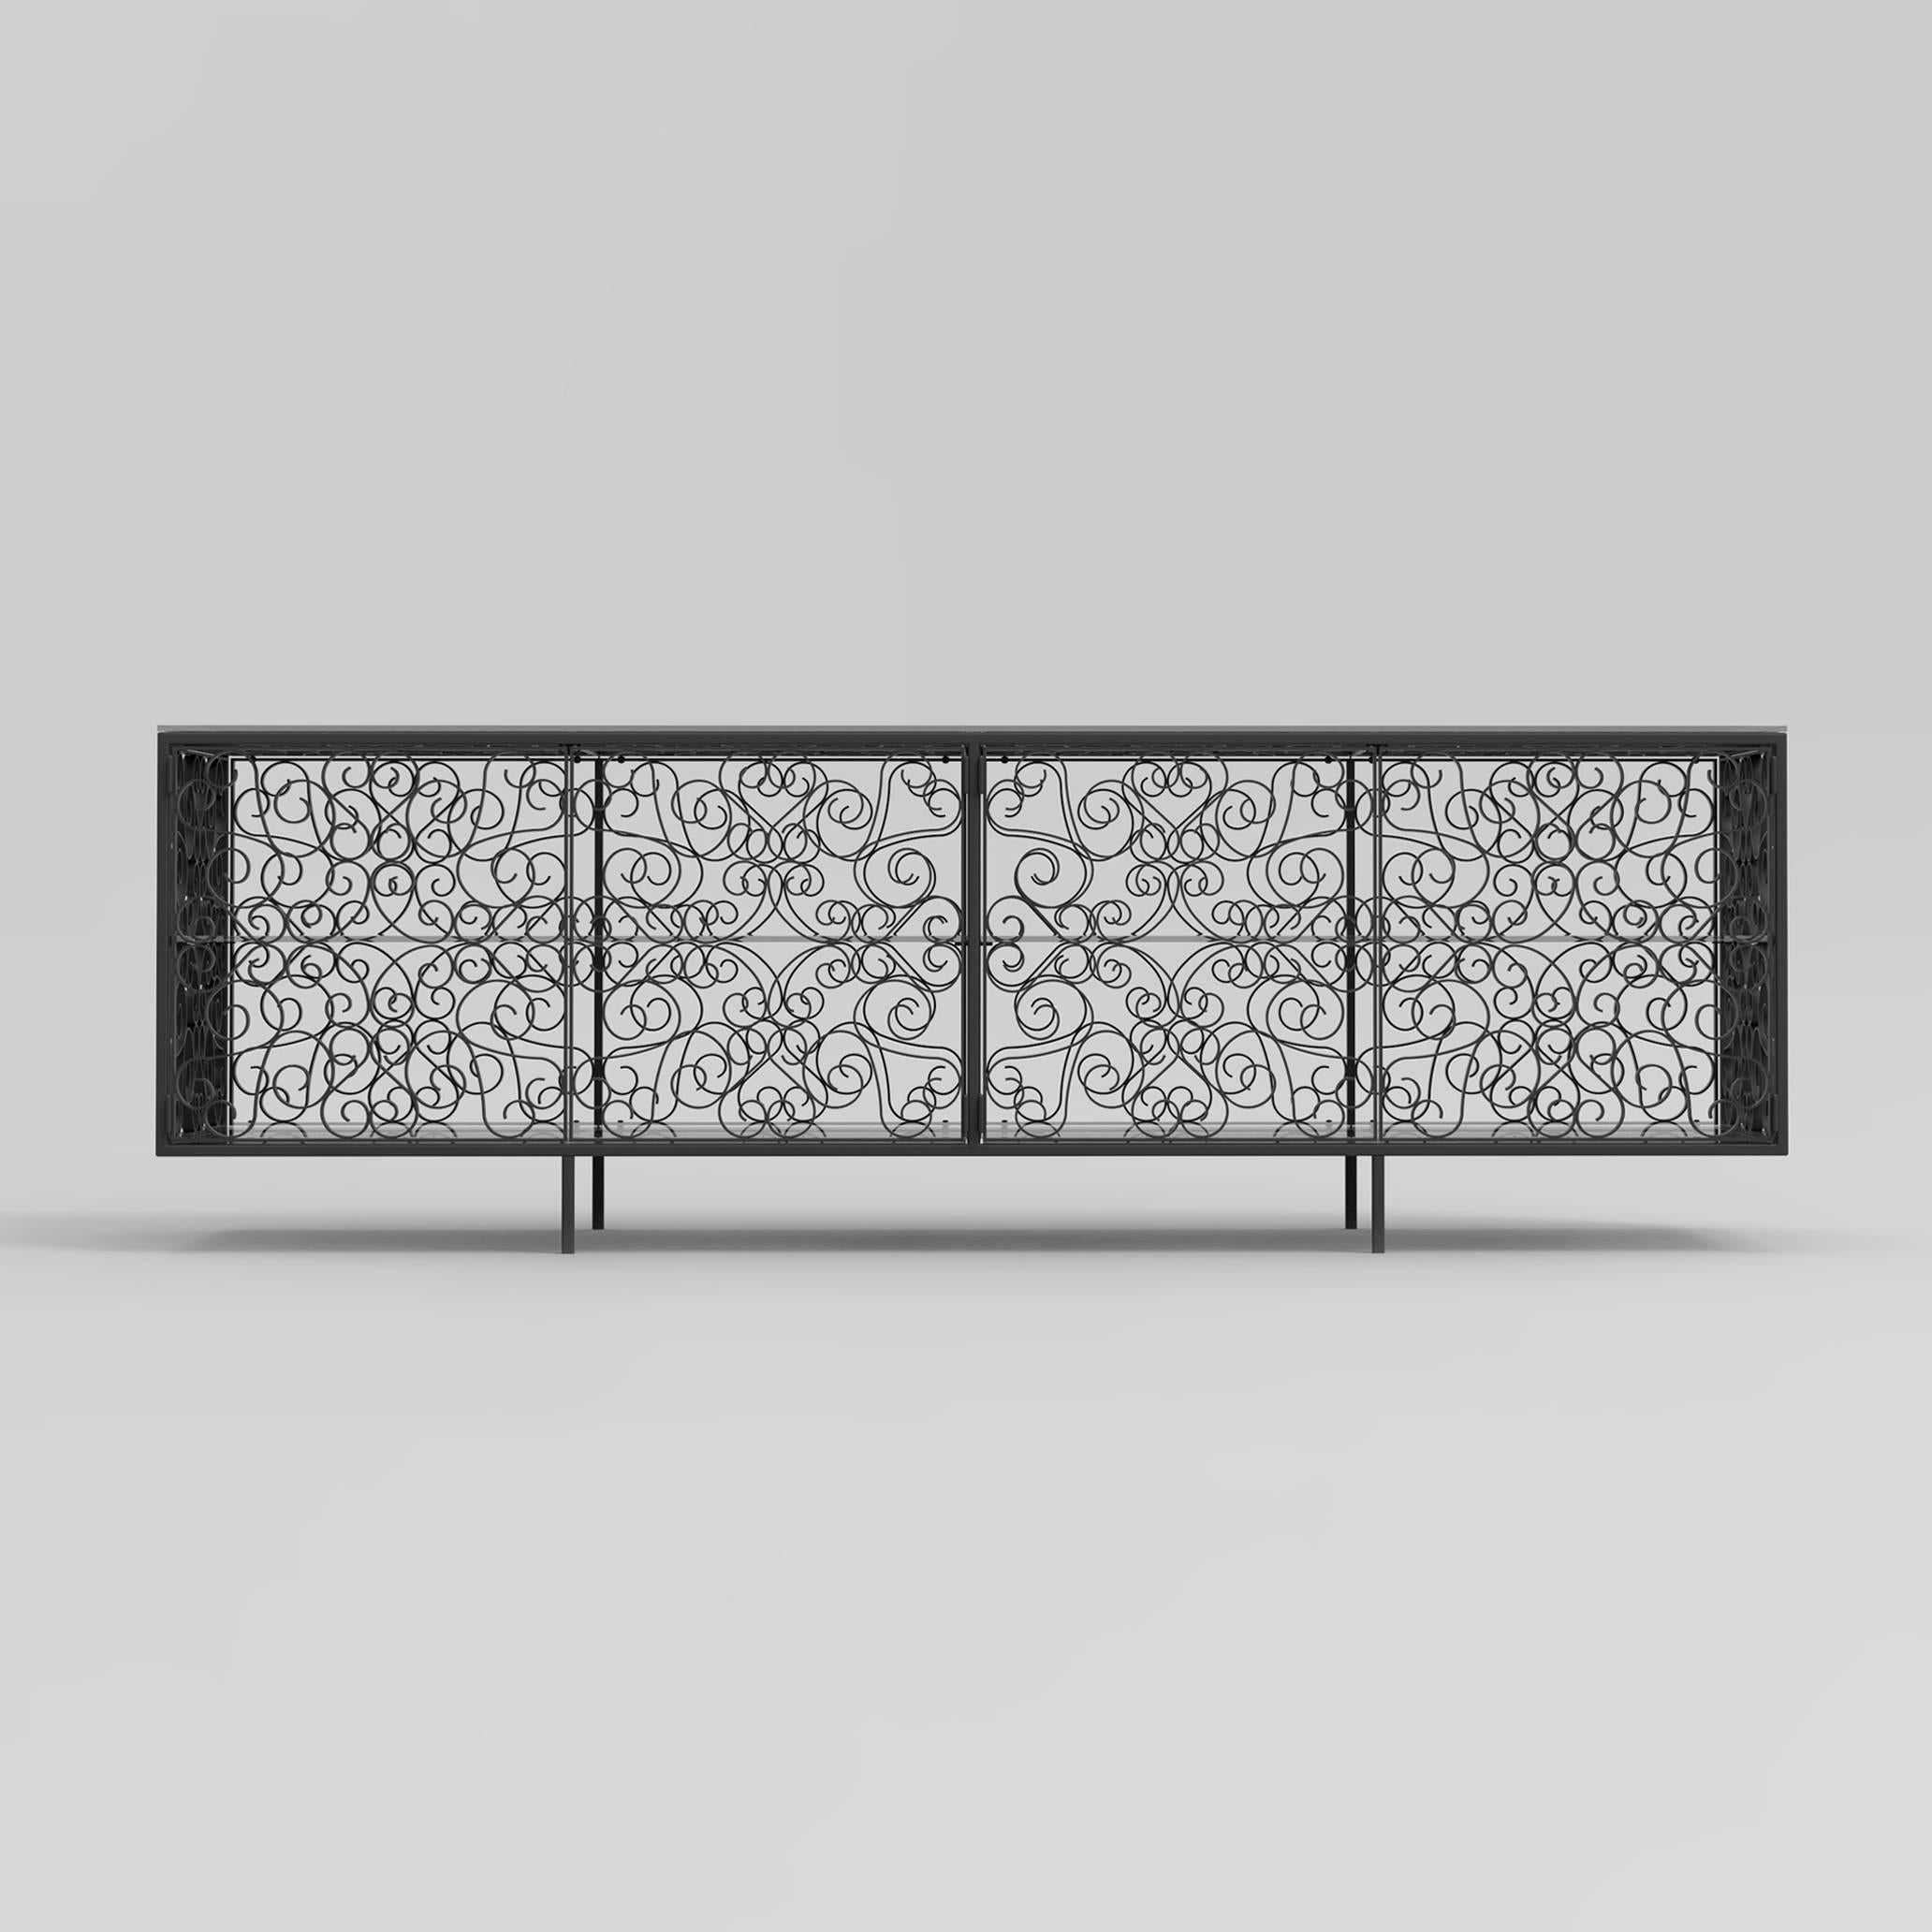 The Dalia cabinet designed by Joel Escalona manufavtured by BD in Barcelona.

The Dalia cabinet is inspired in traditional iron forging, a method used with the purpose of protecting and decorating.
Cast aluminium structure in an anthracite grey,